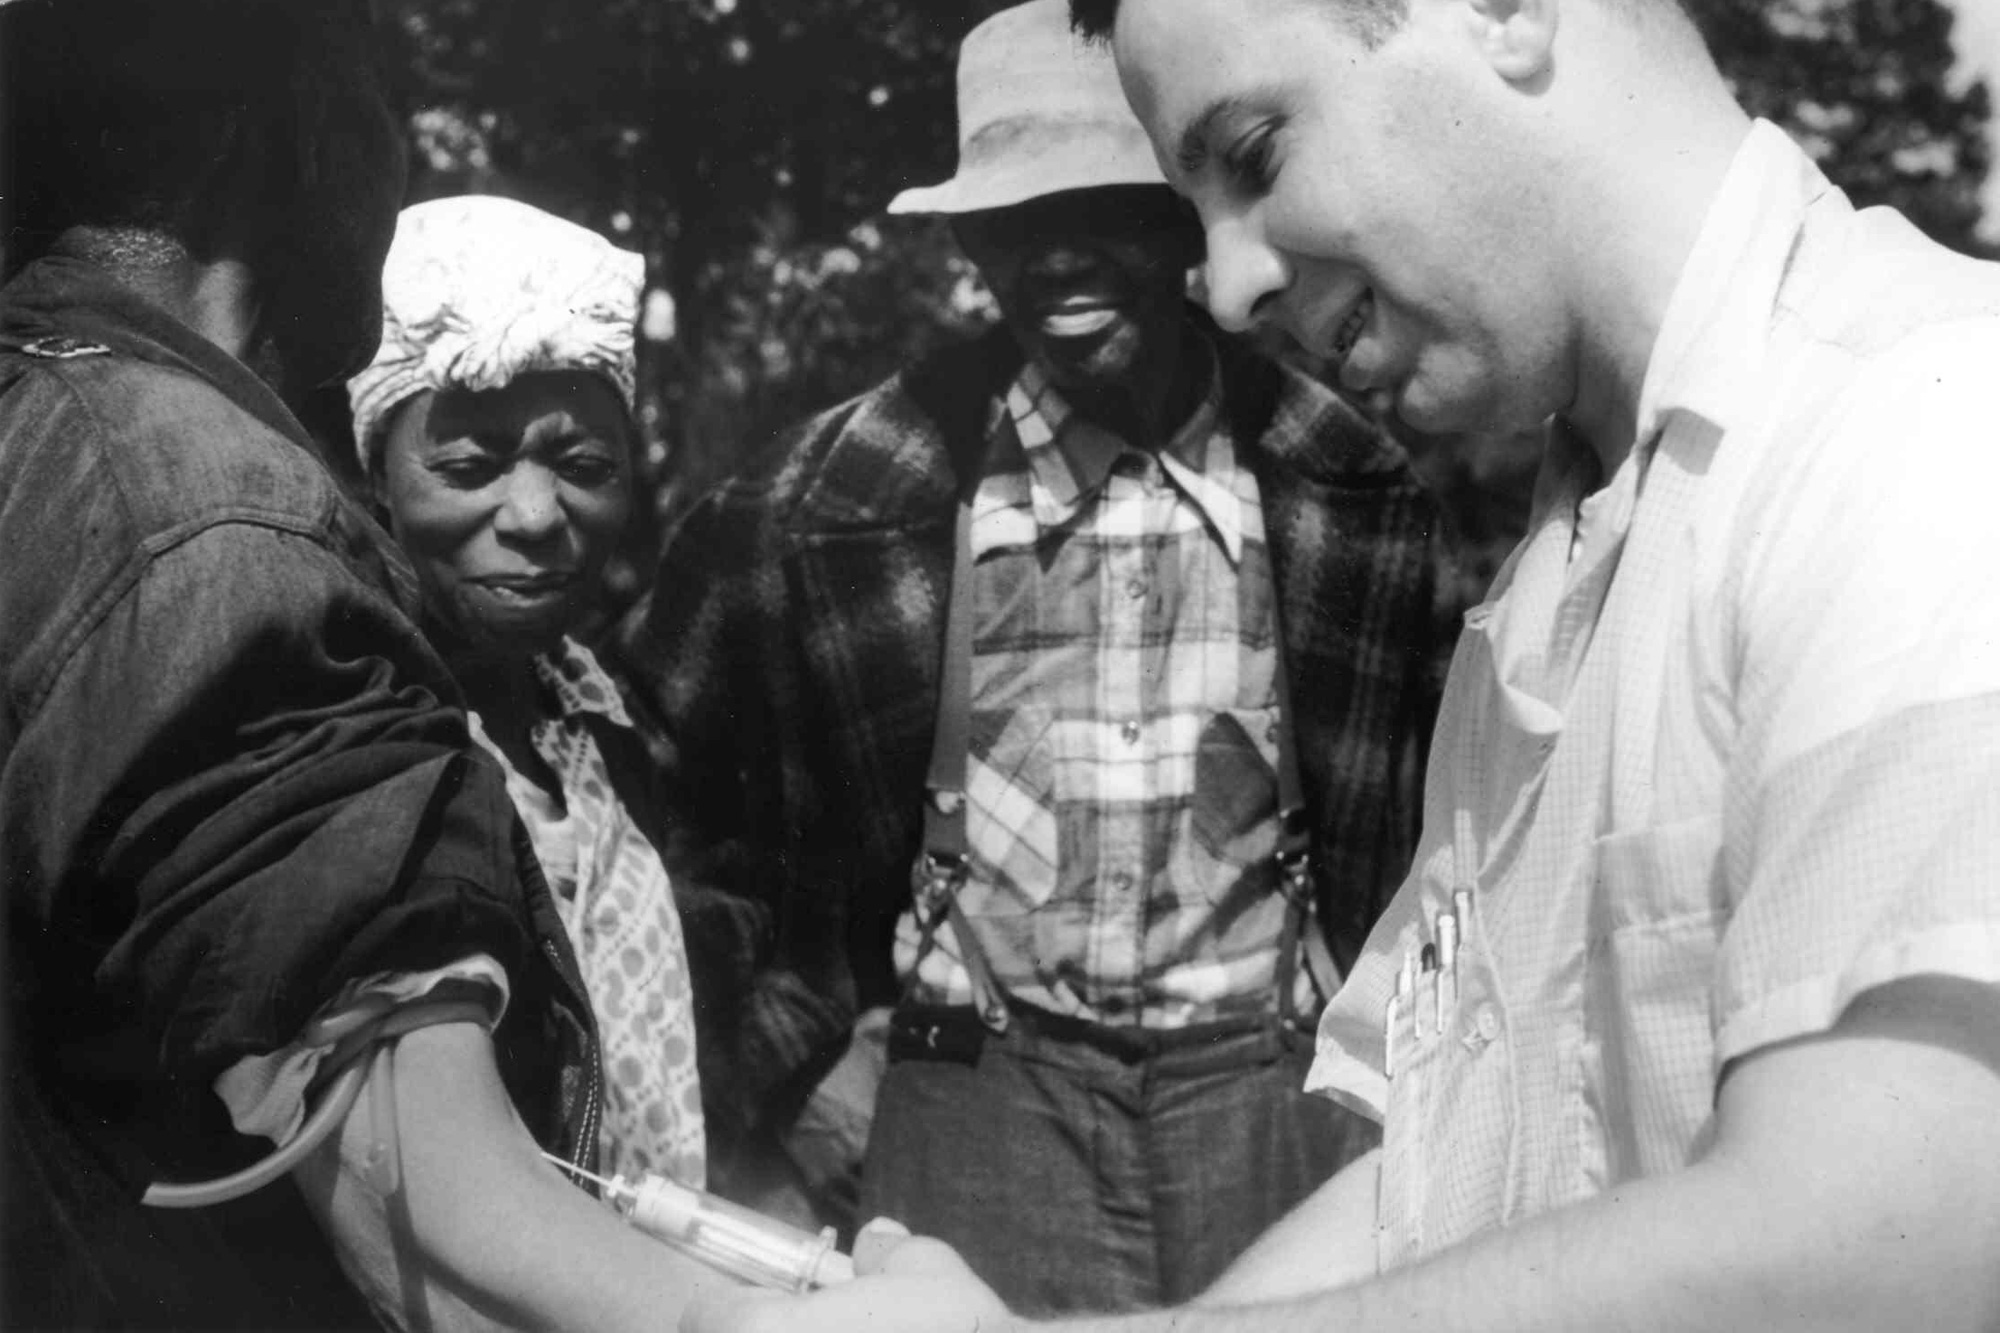 White man injecting a black man while two others watch